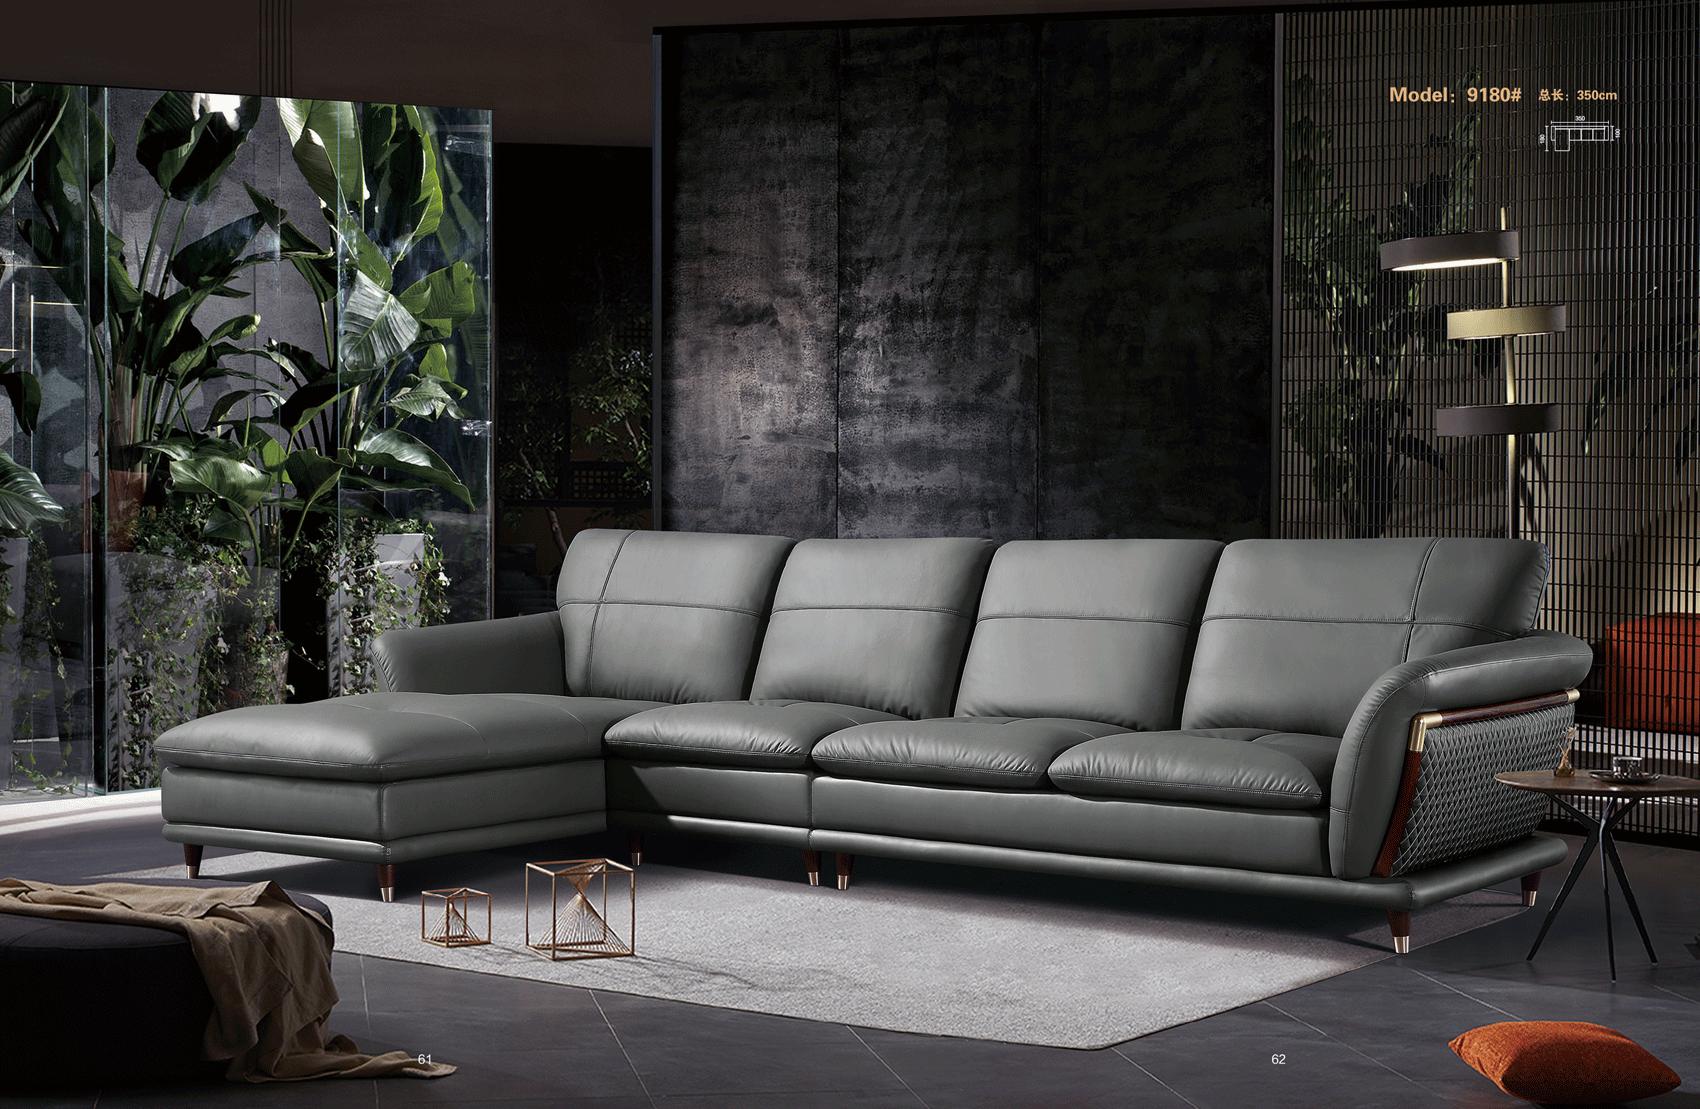 Contemporary, Modern Sectional Sofa 9180 Sectional 9180SECTIONAL in Gray Genuine Leather